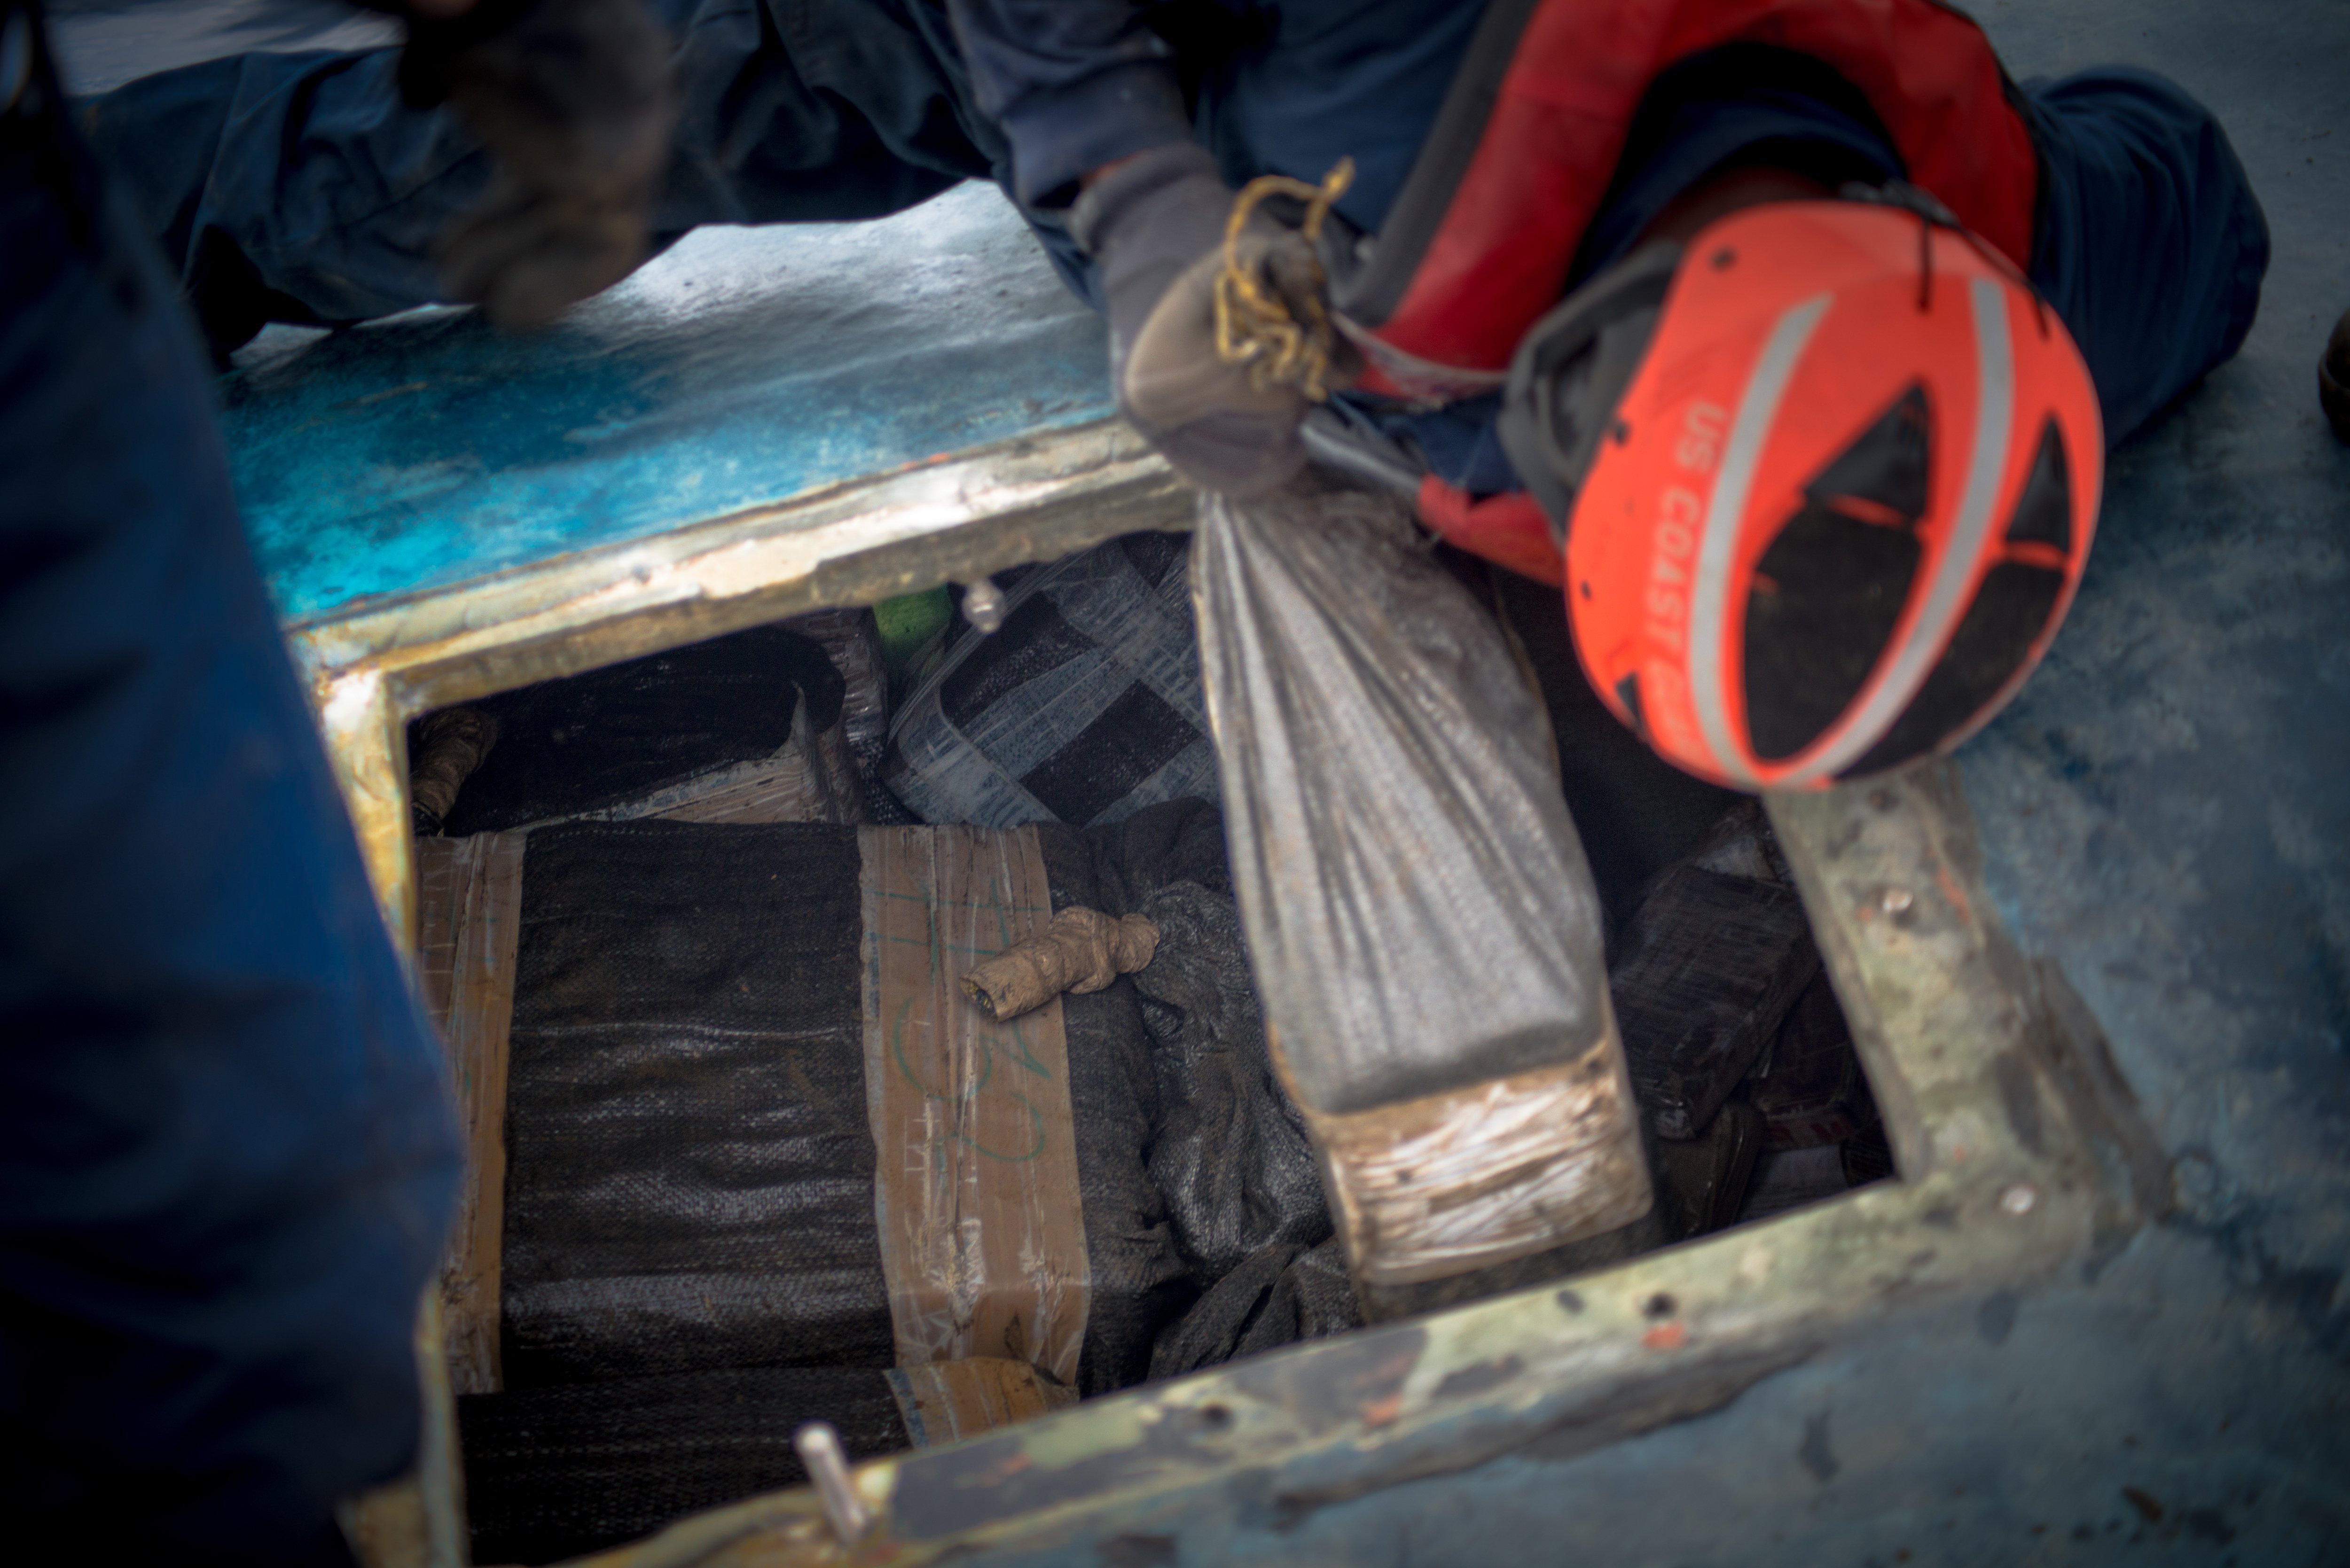 A Coast Guard Cutter Stratton boarding team seizes cocaine bales from a self-propelled semi-submersible interdicted in international waters off the coast of Central America, July 19, 2015. The Coast Guard recovered more than 6 tons of cocaine from the 40-foot vessel.